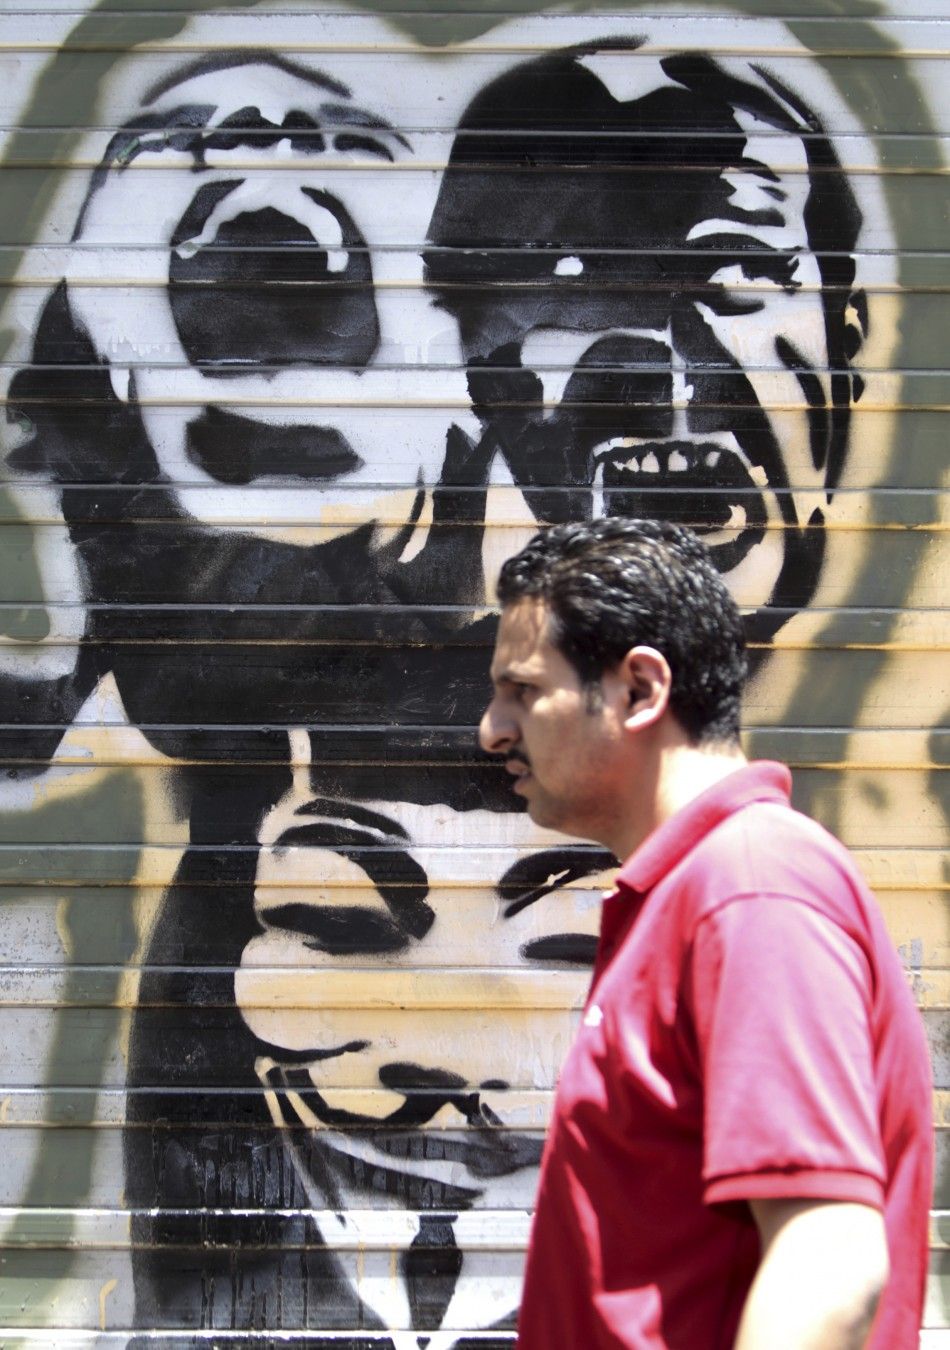 An Egyptian man walks in front of a wall sprayed with graffiti depicting protesters shouting, near Tahrir Square in downtown Cairo